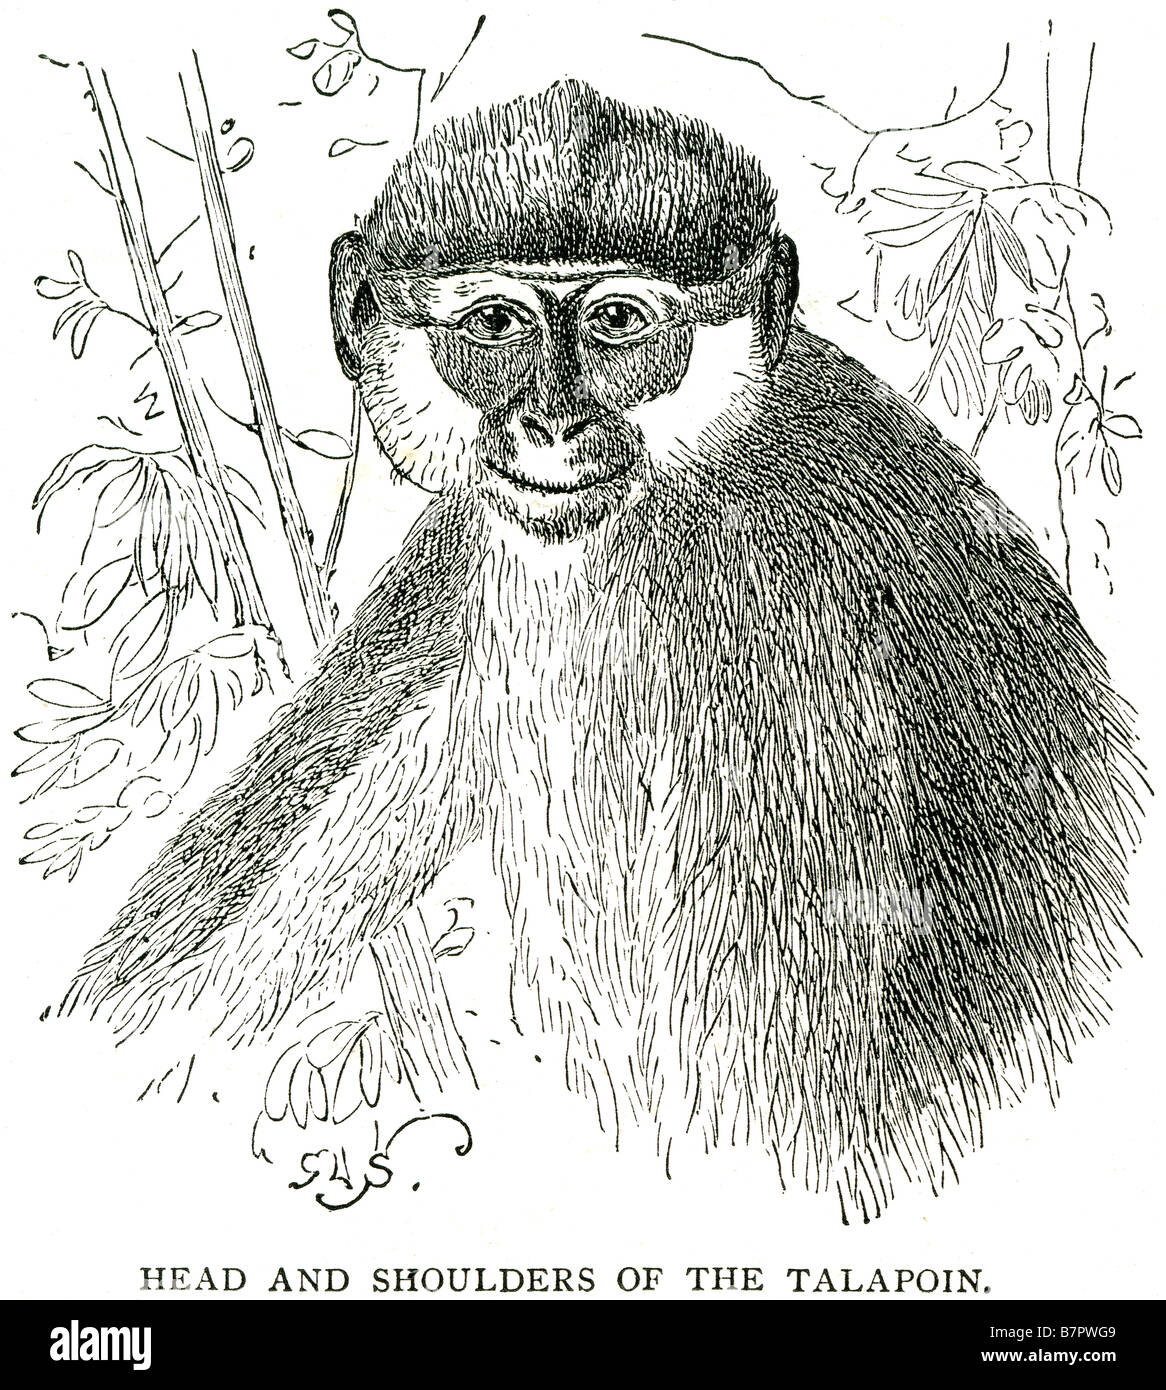 Talapoins are the two species of Old World monkeys classified in genus Miopithecus. They live in central Africa and their range Stock Photo